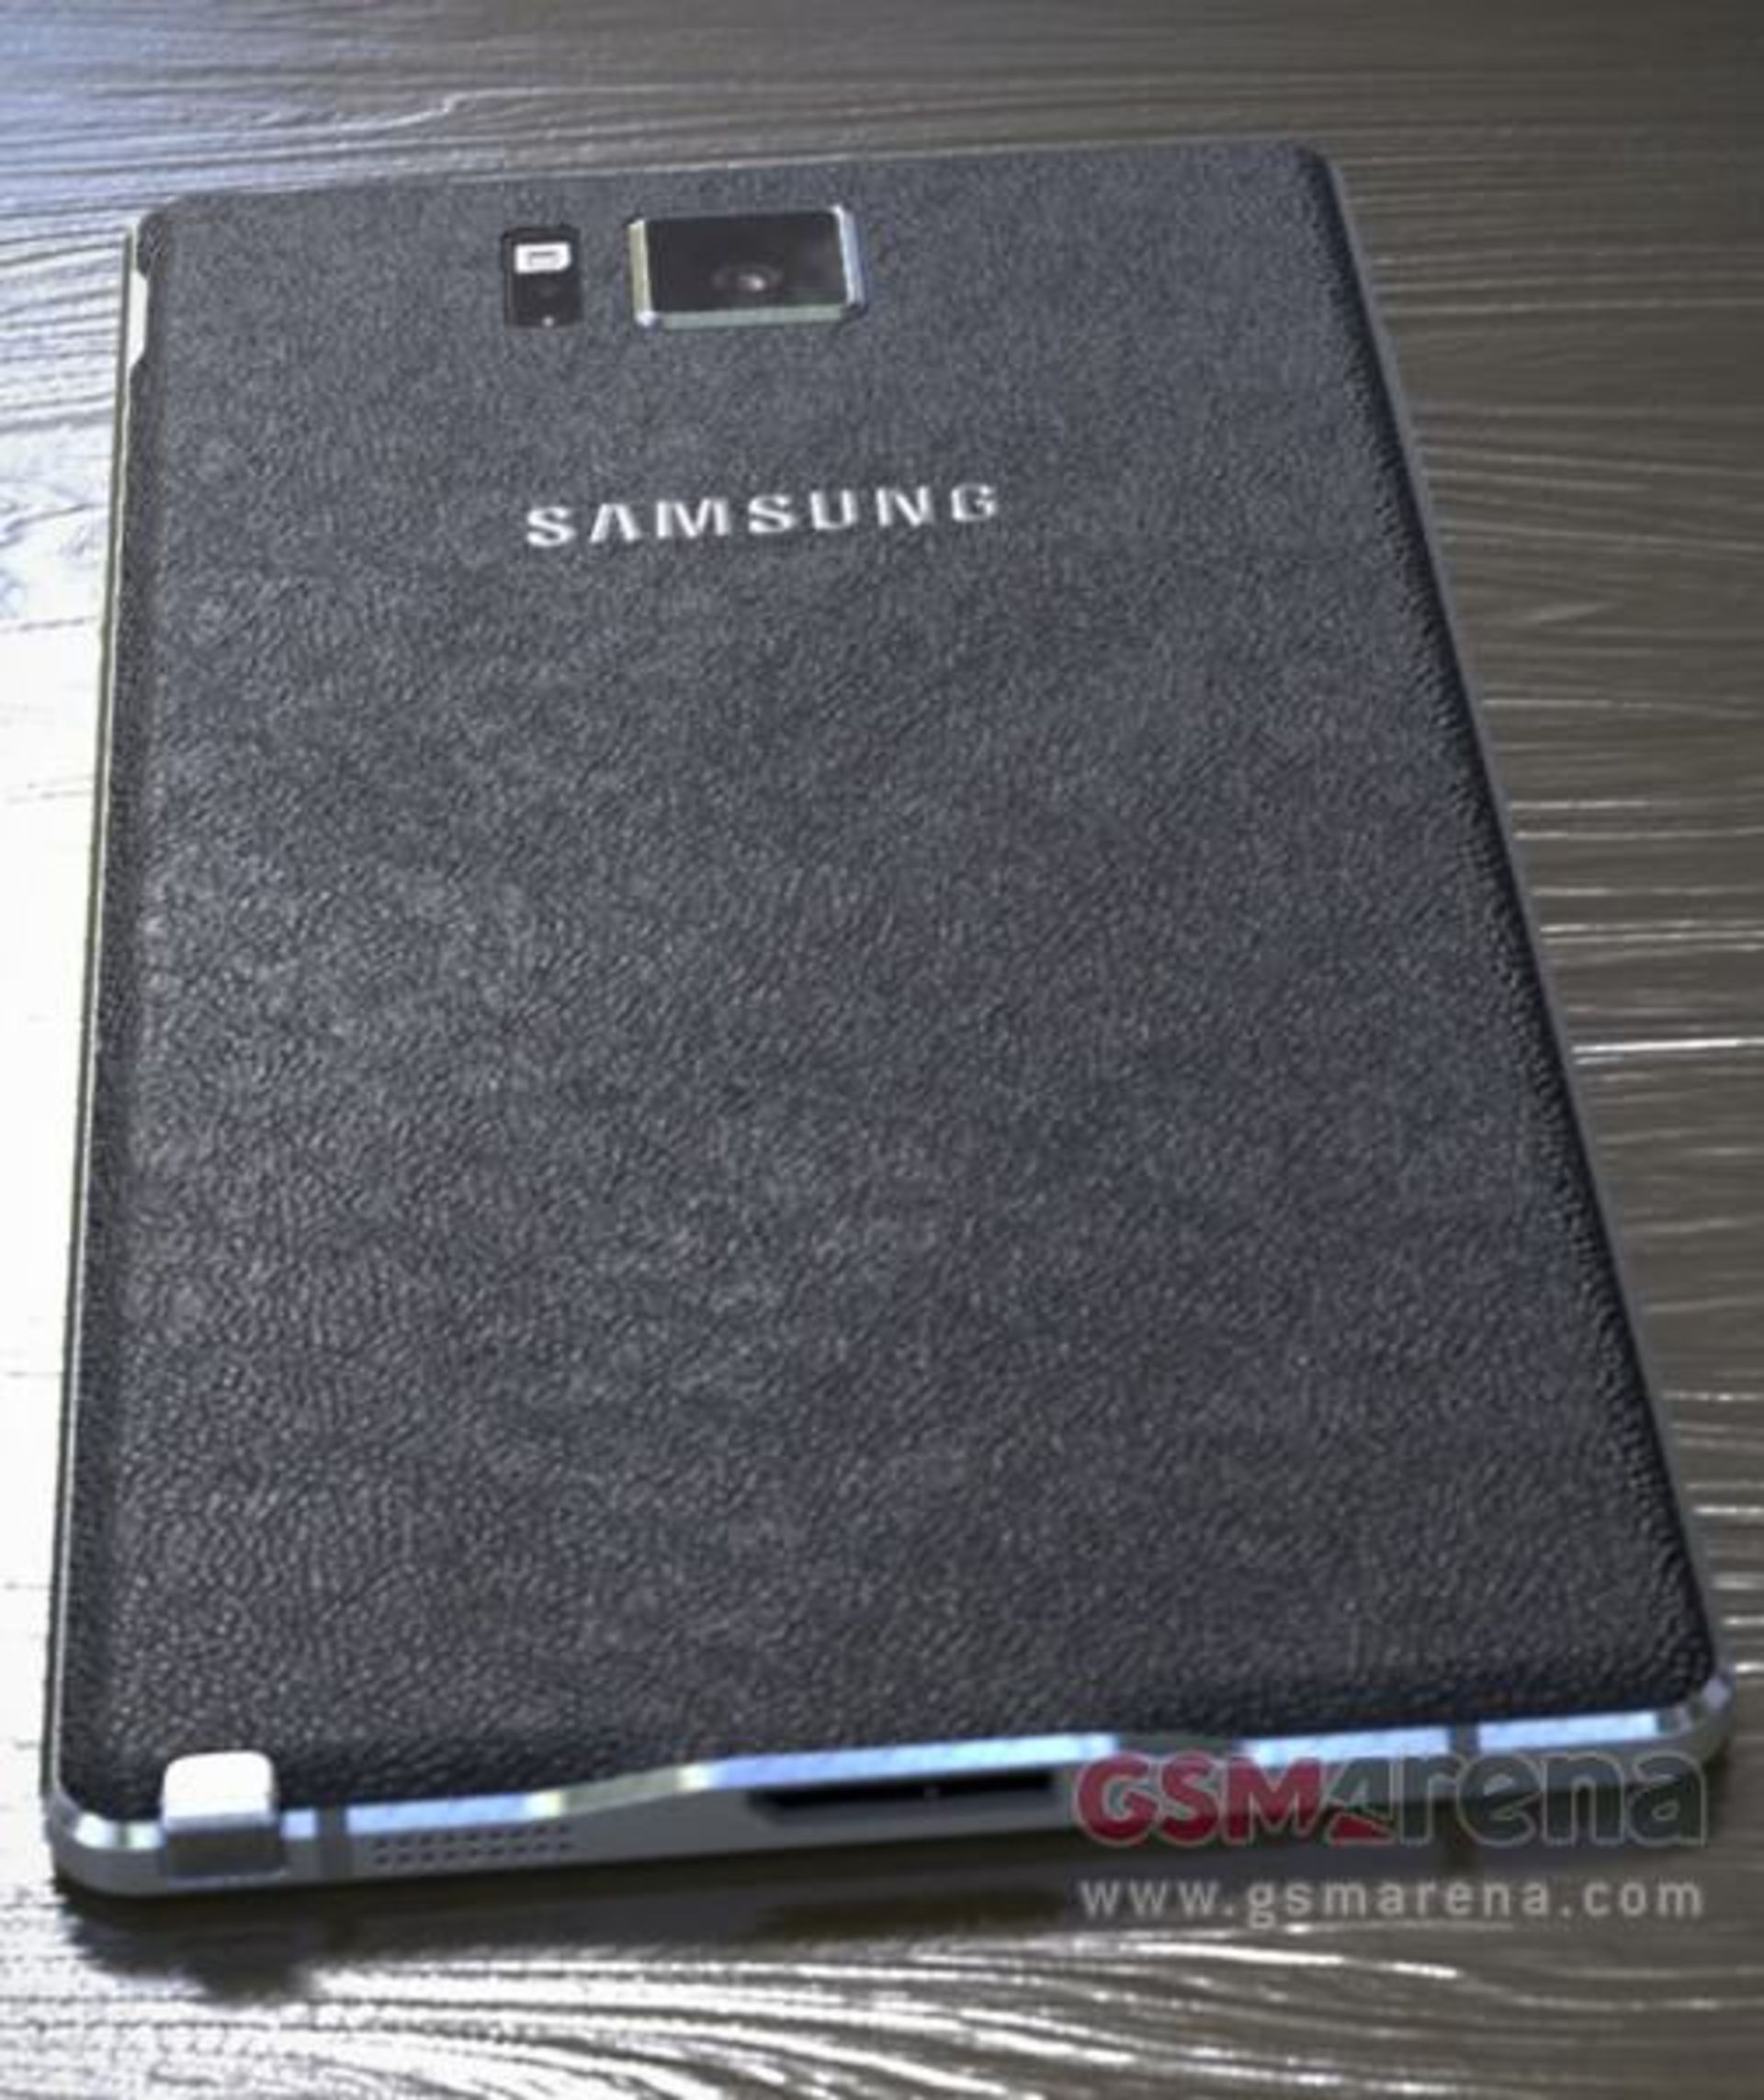 samsung-galaxy-note-4-leaked-2